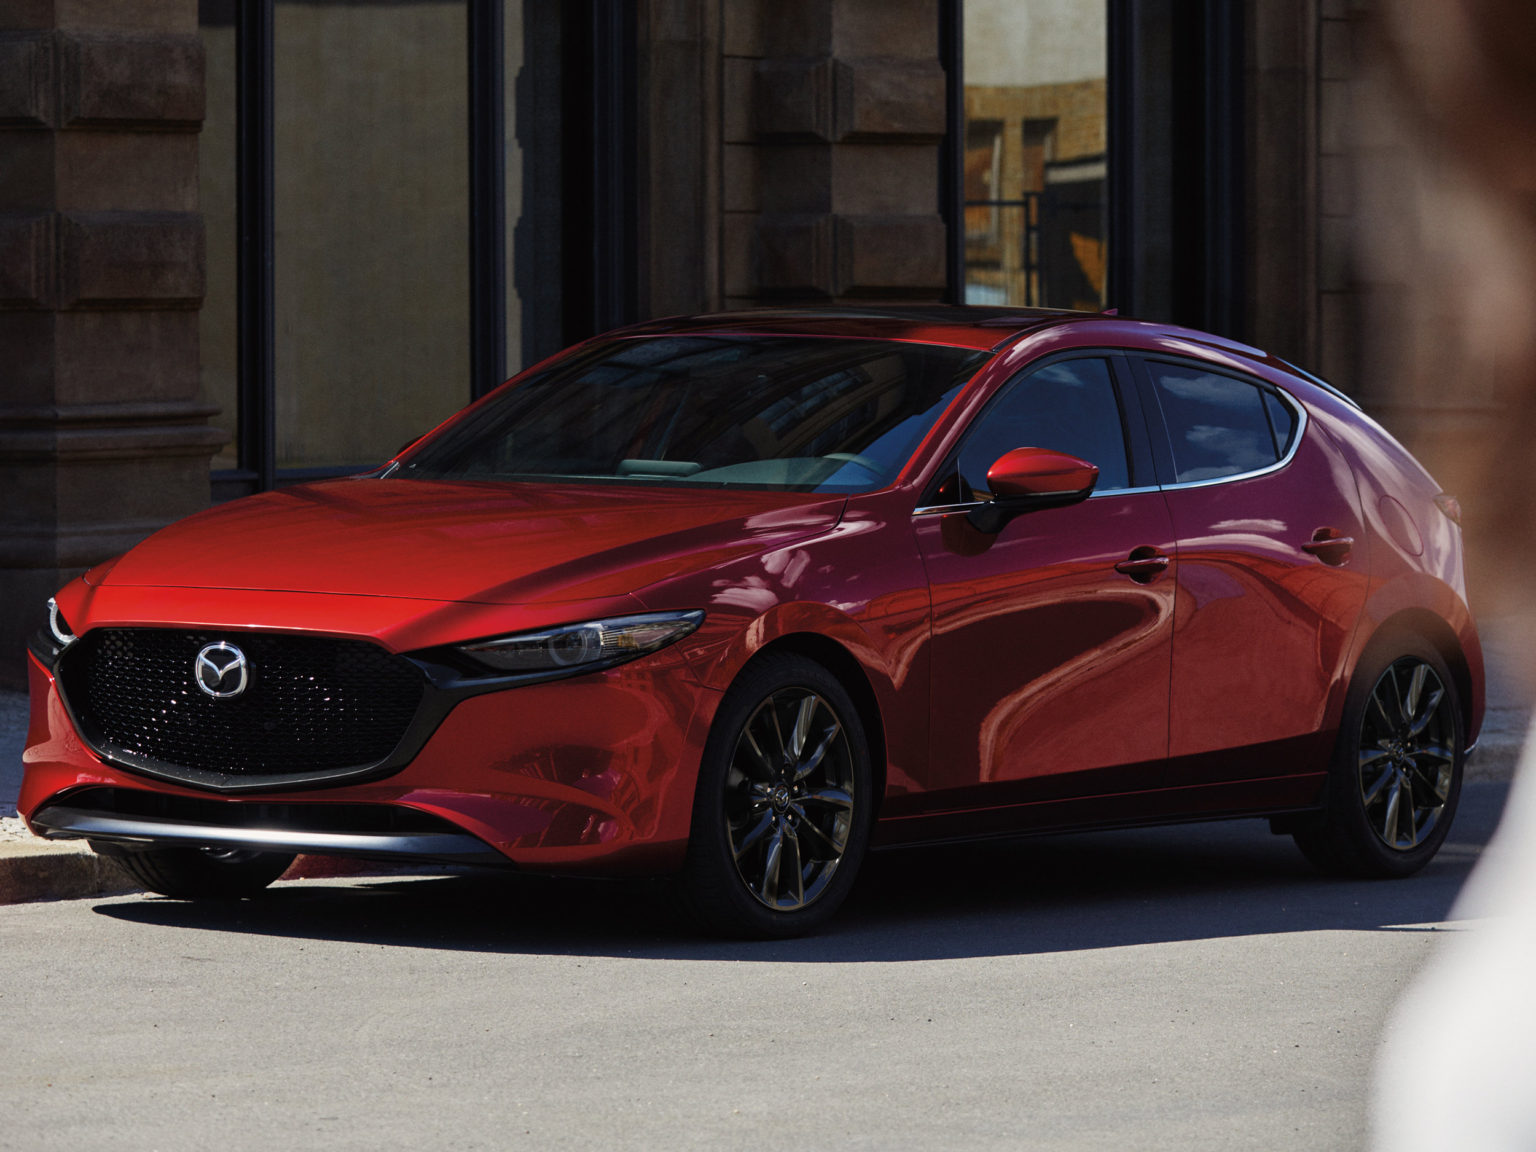 Mazda has completely redesigned the Mazda3 from the ground up.